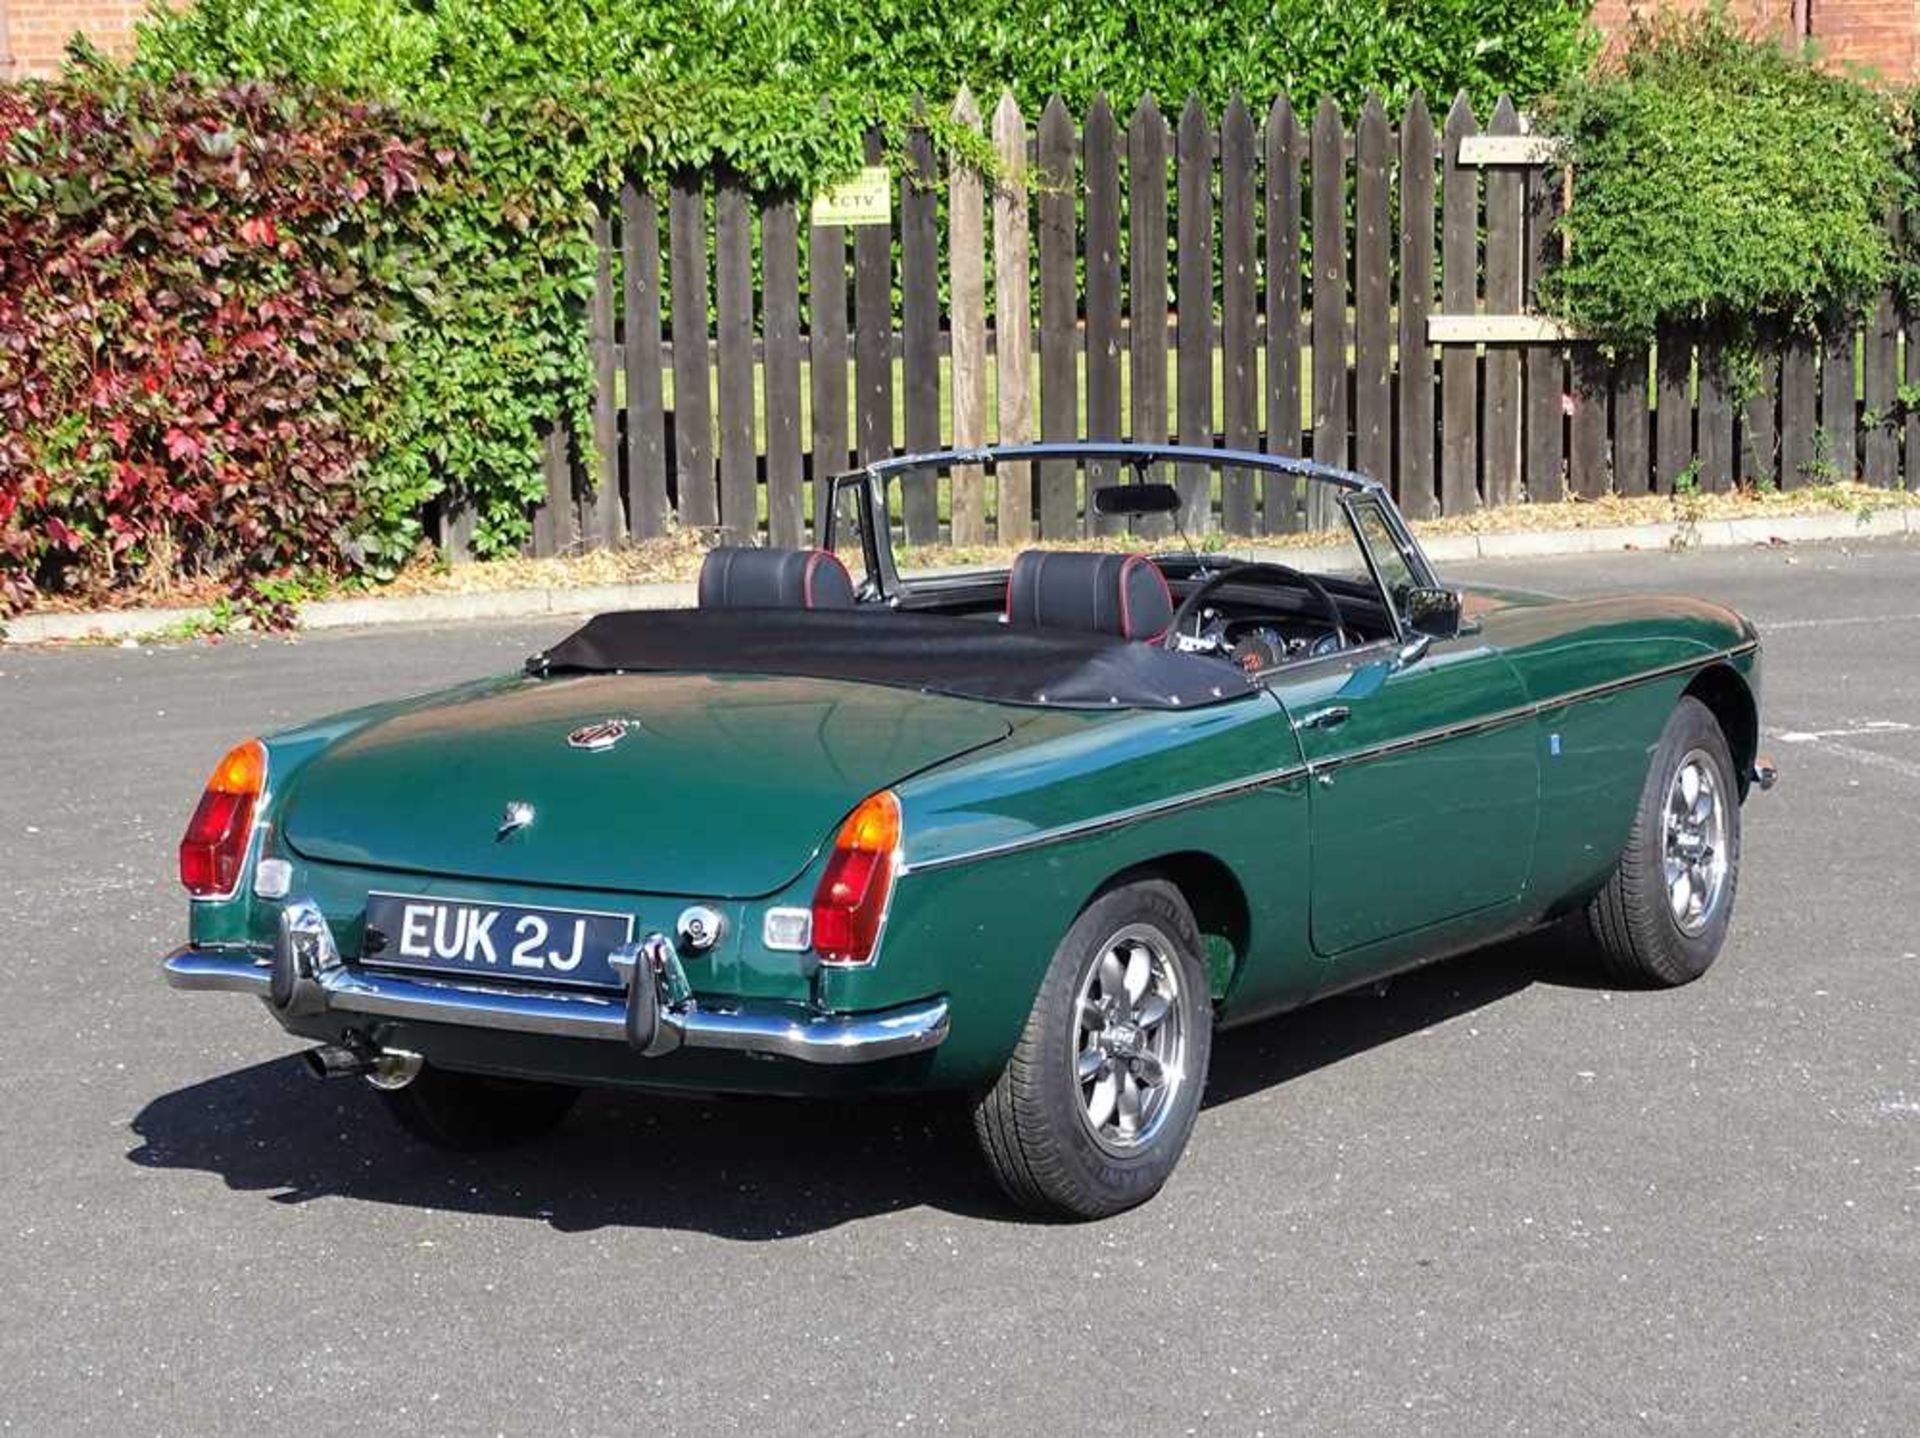 1971 MG B Roadster Restored at a cost of c.£33,000 - Image 13 of 43